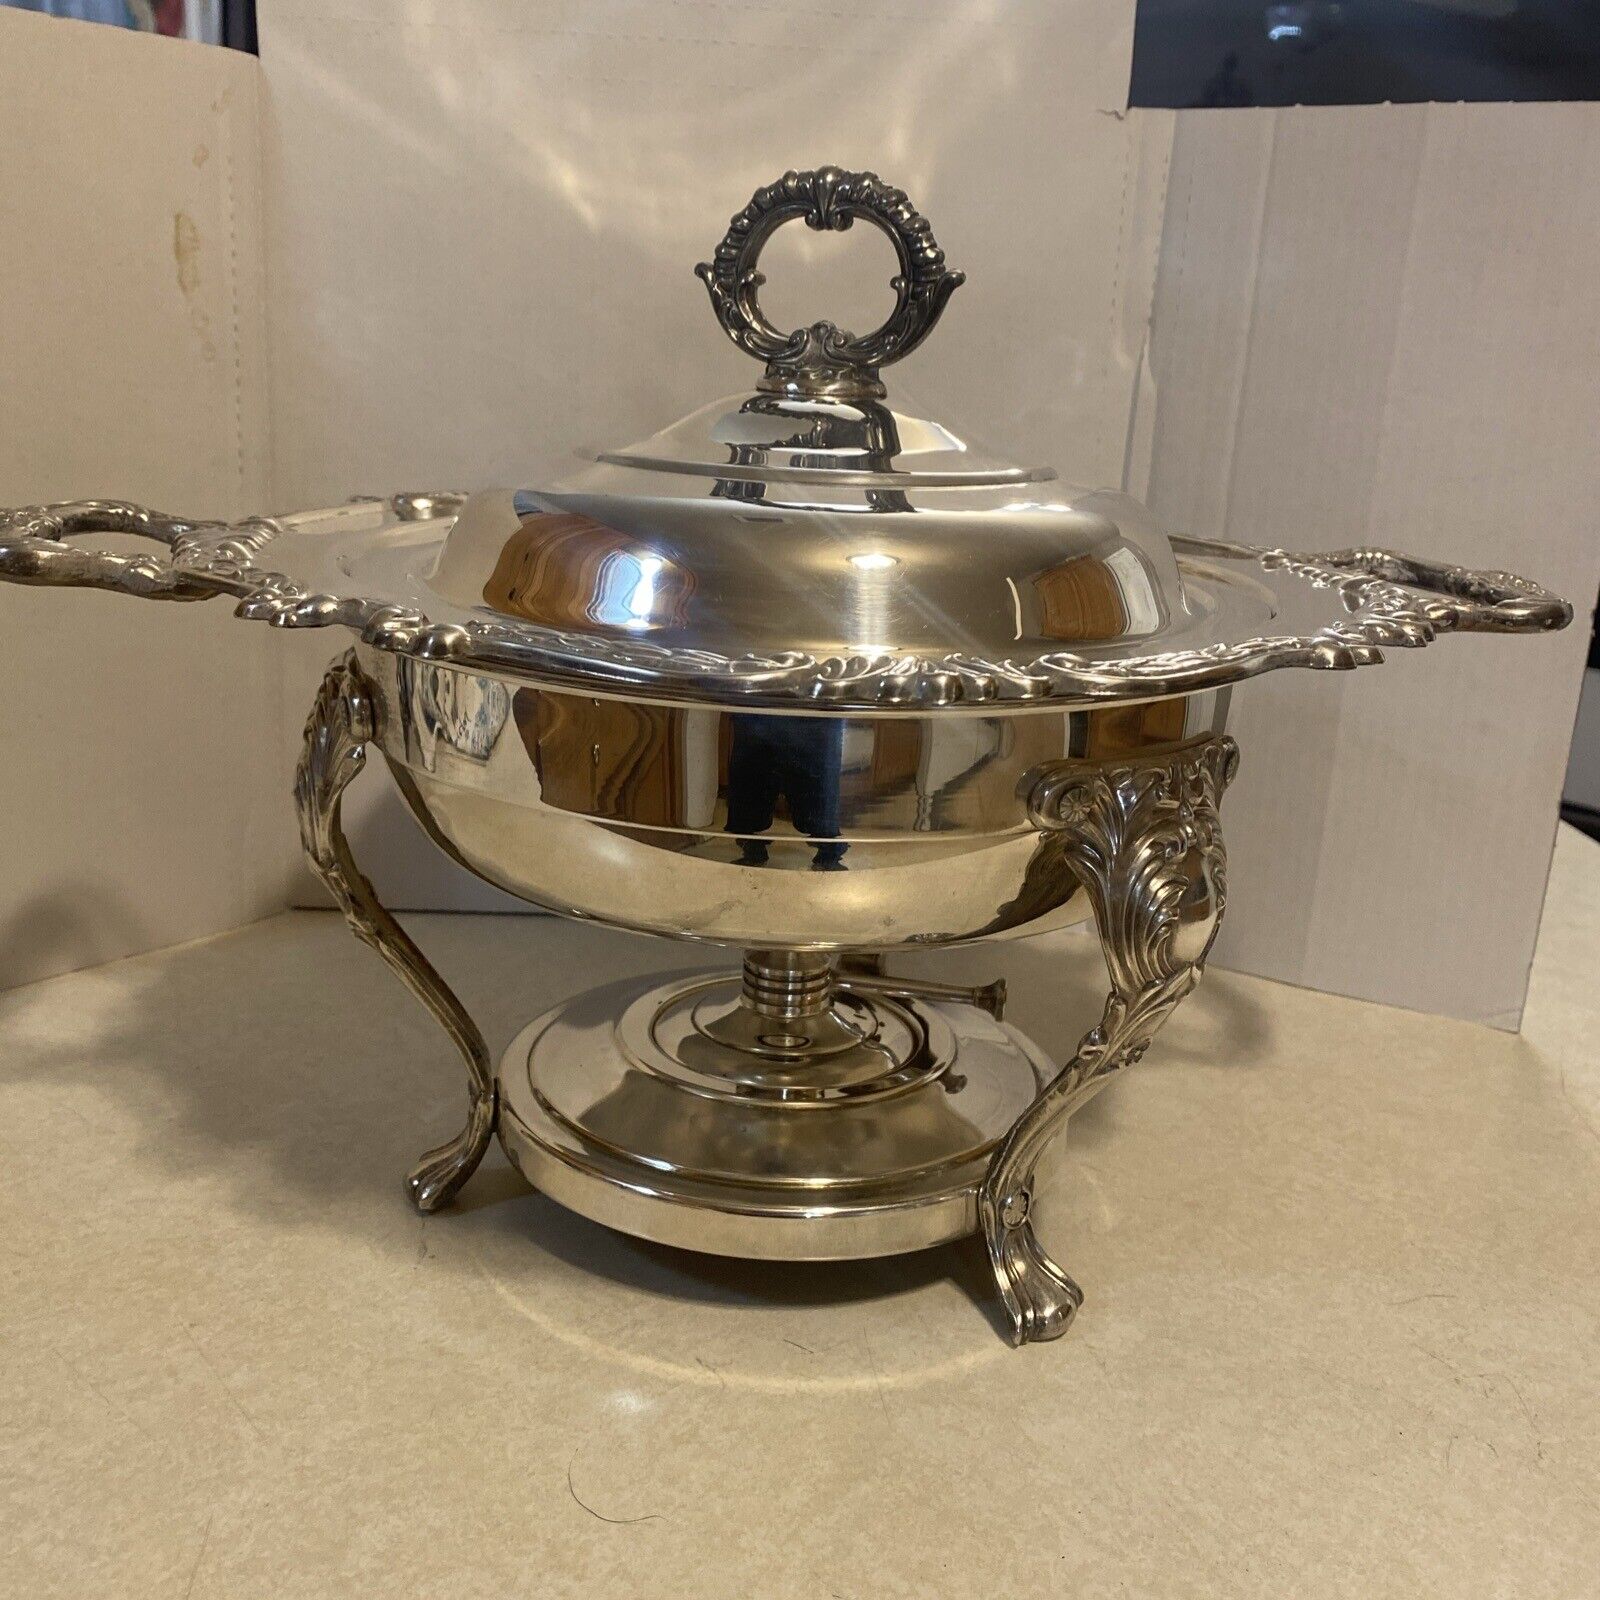 Sheridan Taunton Silversmith Chafing Dish EP Brass, Look At Pictures For Details